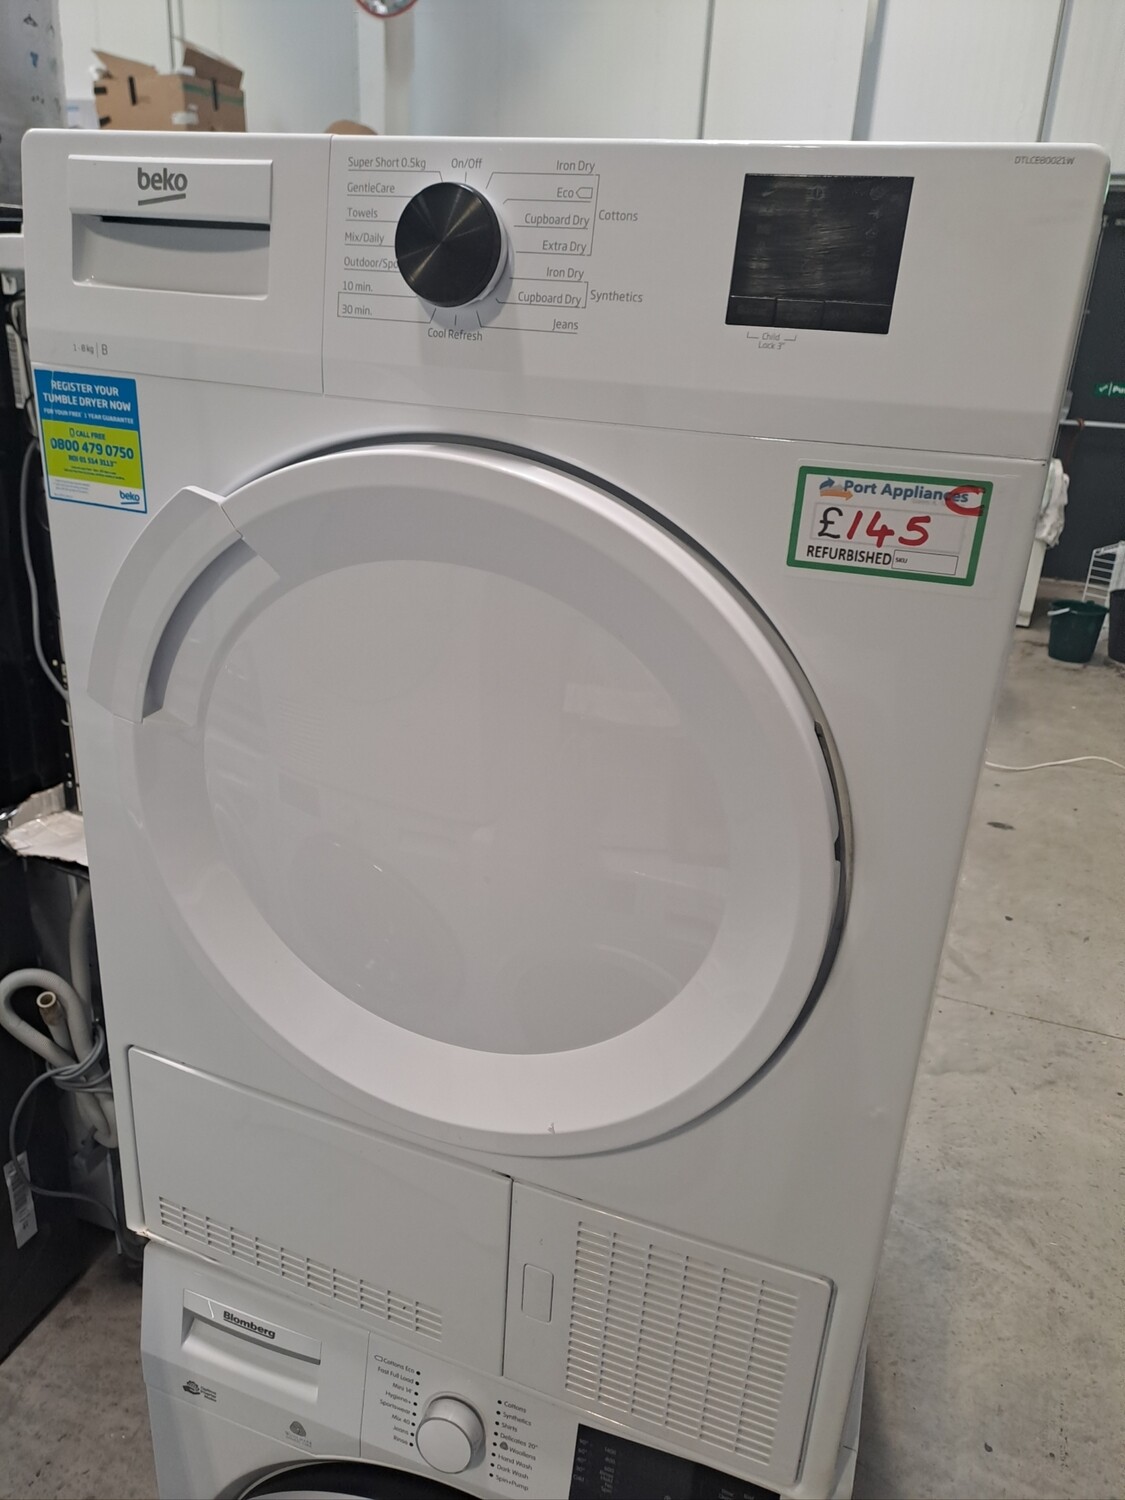 Beko DTLCE80021W 8Kg Condenser Dryer White Refurbished 6 Months Guarantee . This item is Located in our Whitby Road Shop